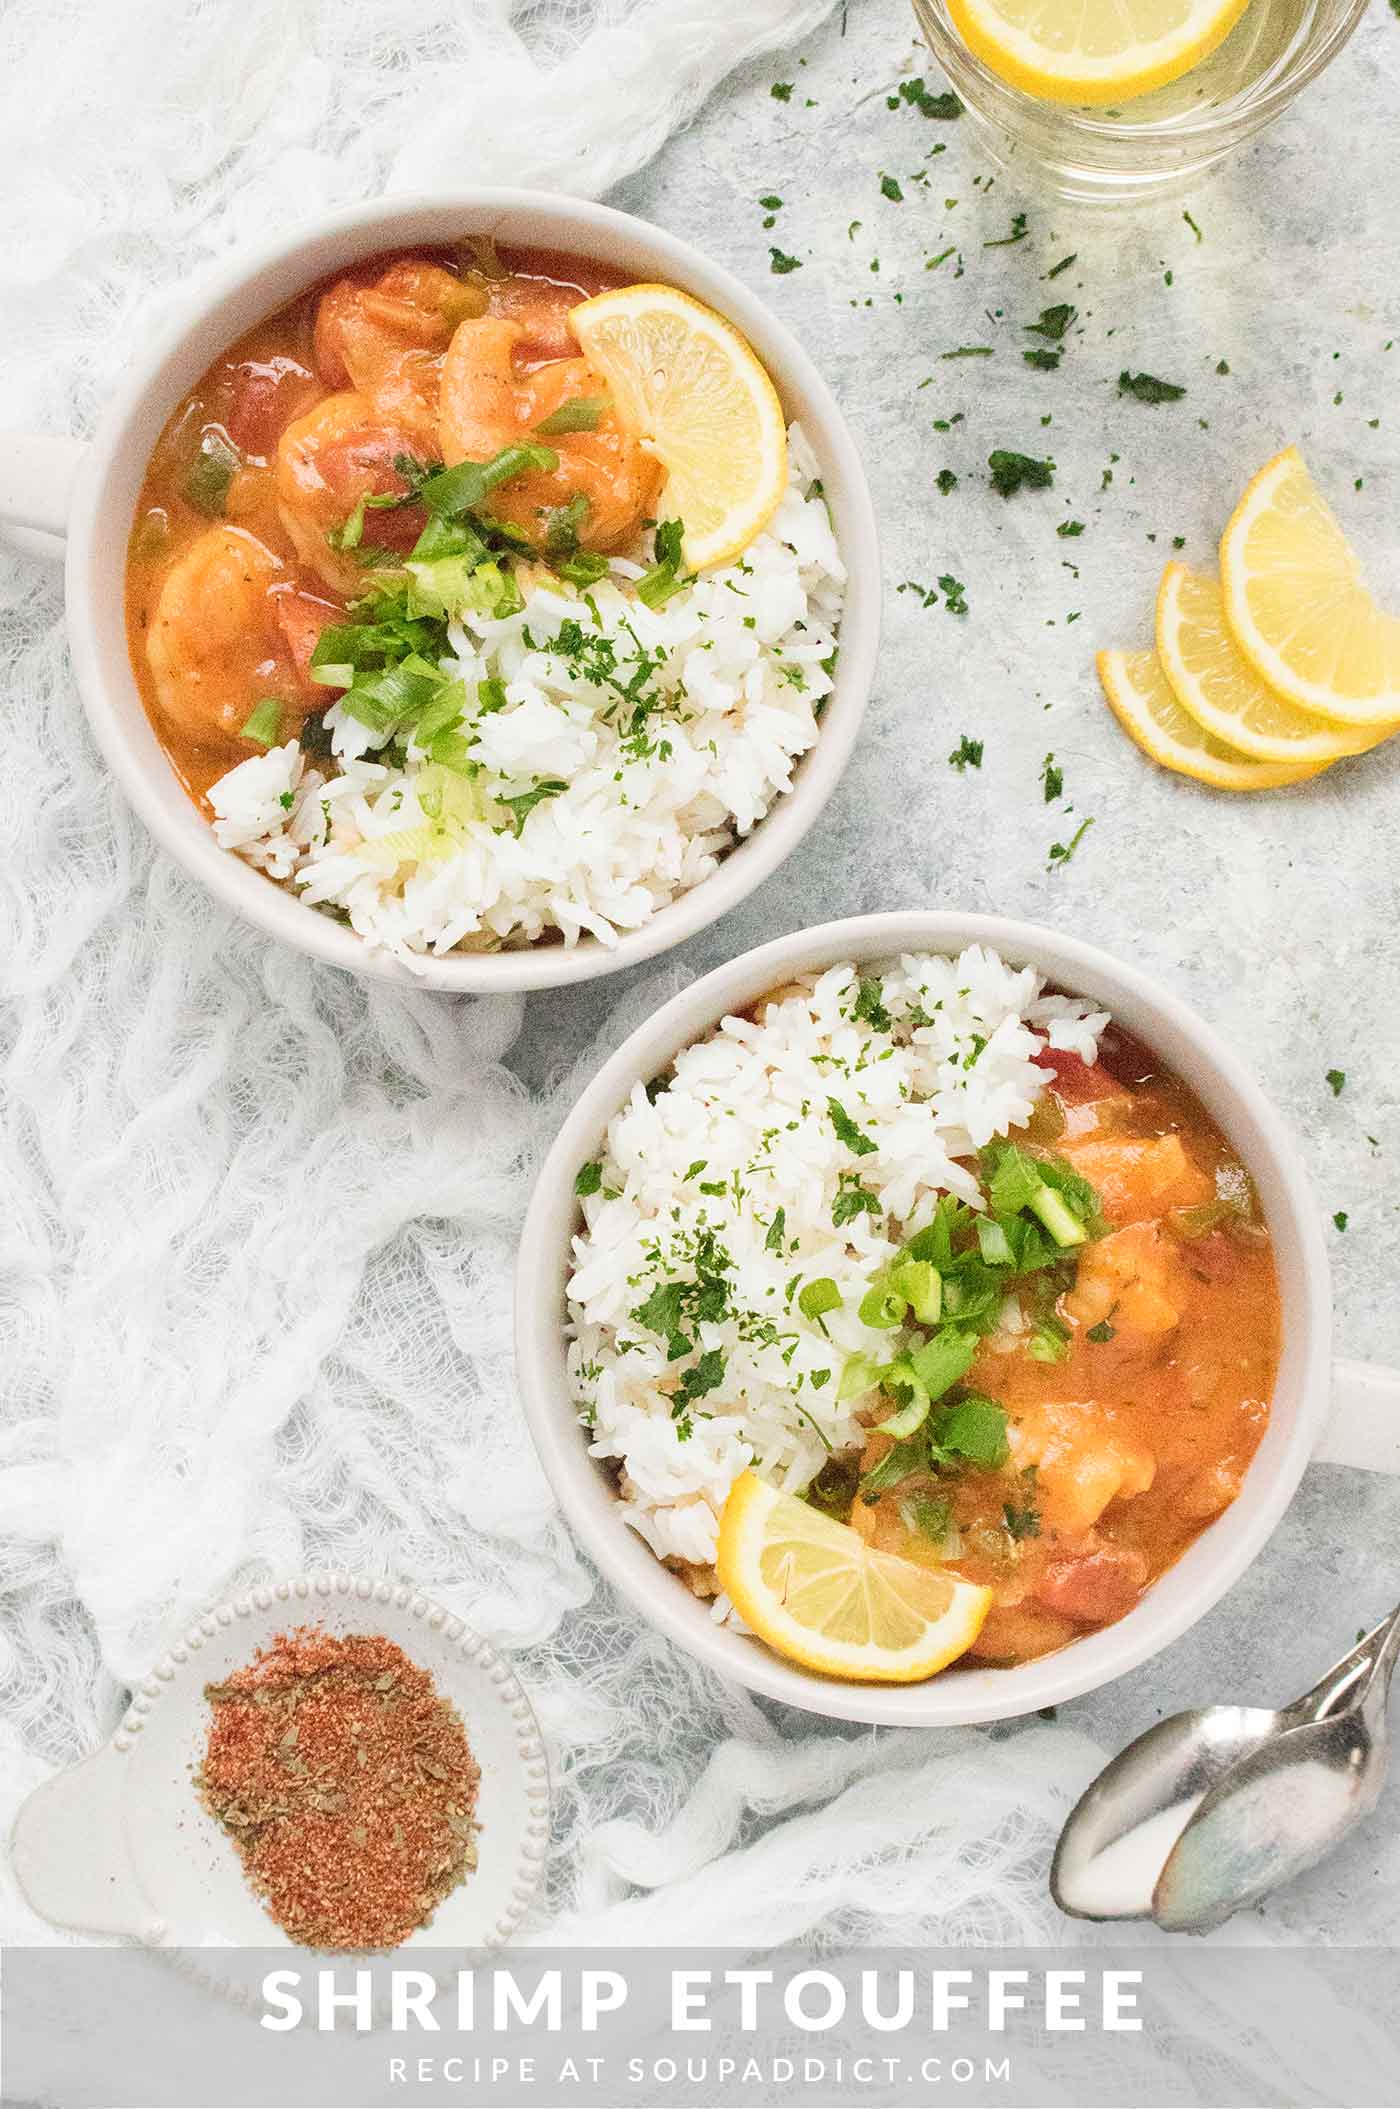 Two bowls of Shrimp Etouffee with white rice